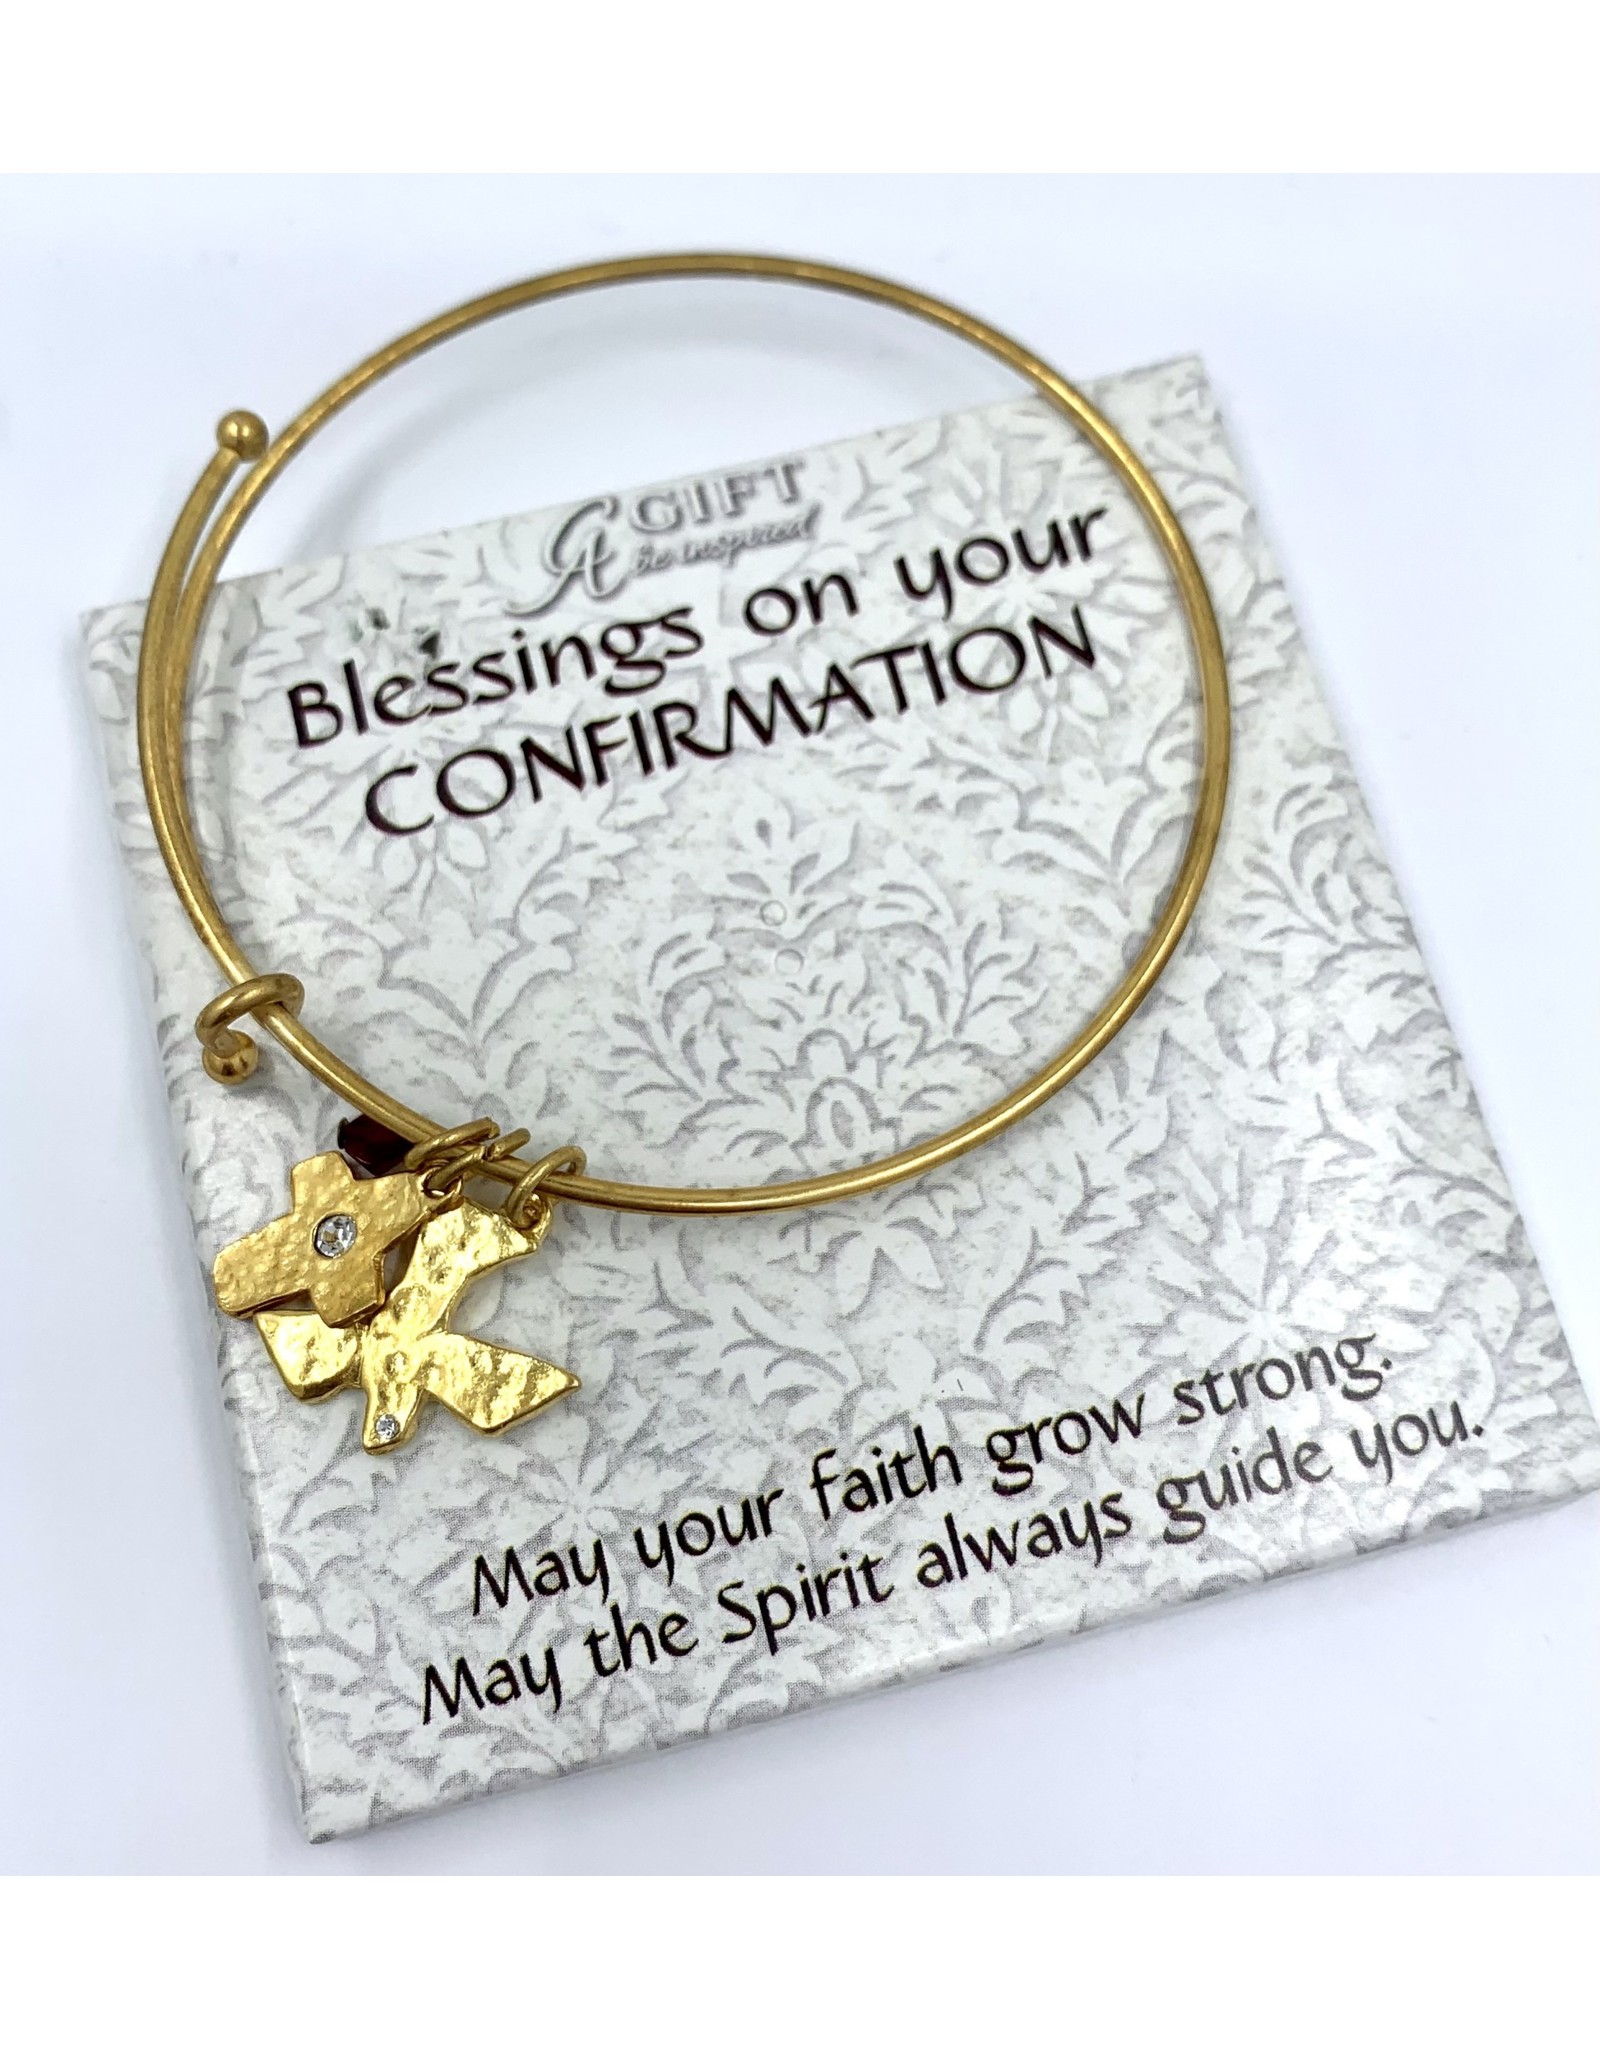 Abbey & CA Gift Confirmation Bracelet - Gold Bangle with Dove, Cross, and Gem